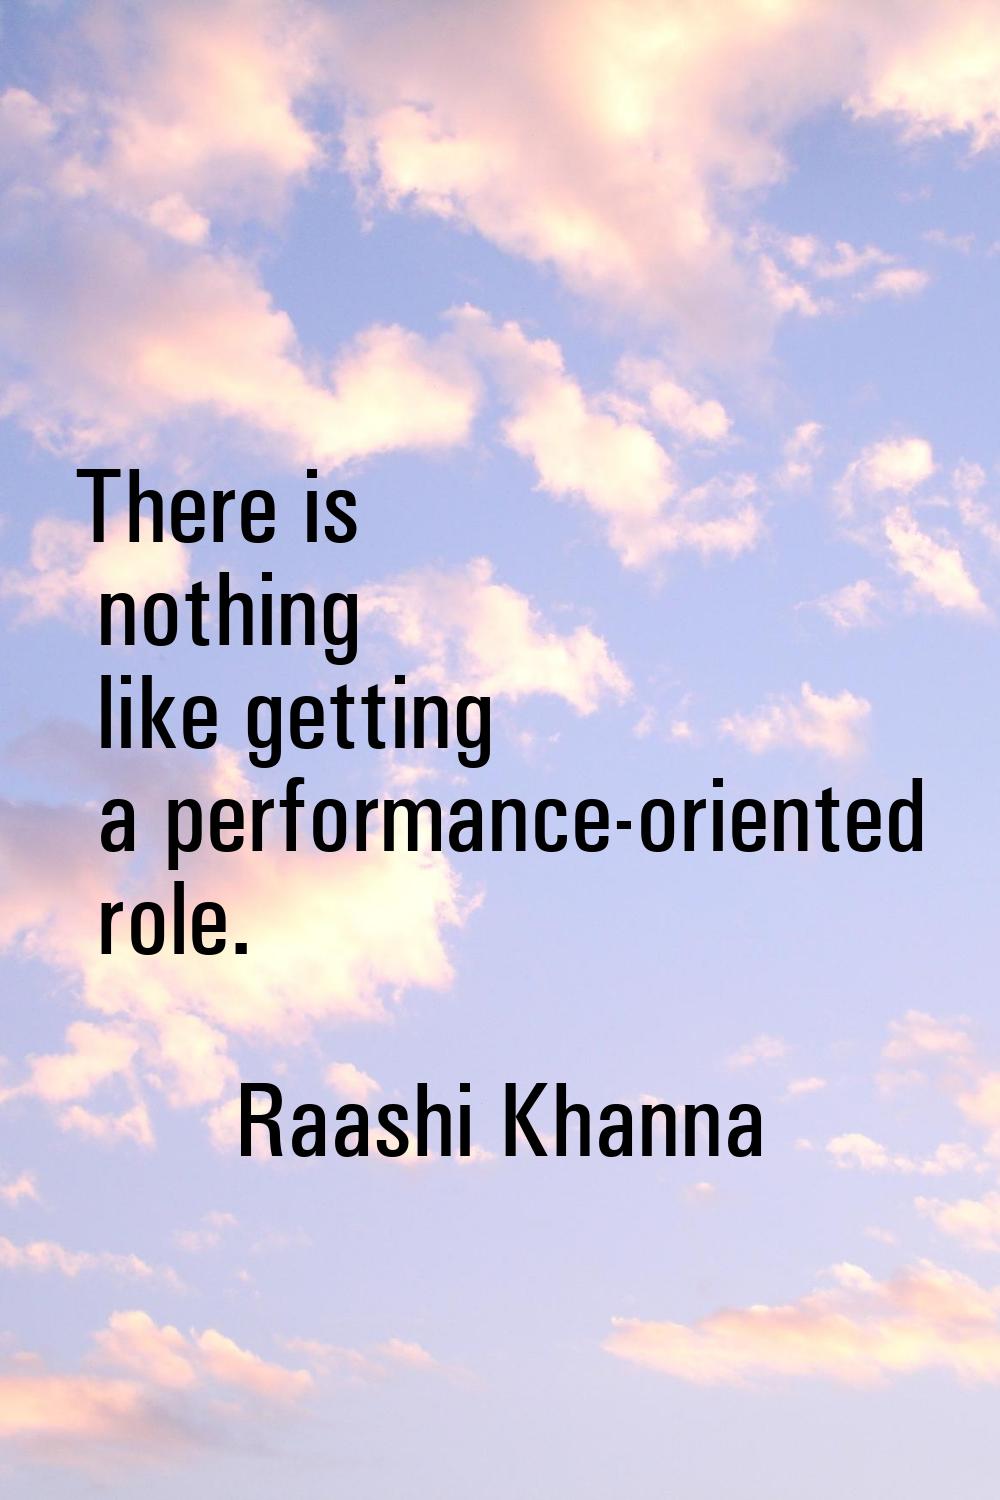 There is nothing like getting a performance-oriented role.